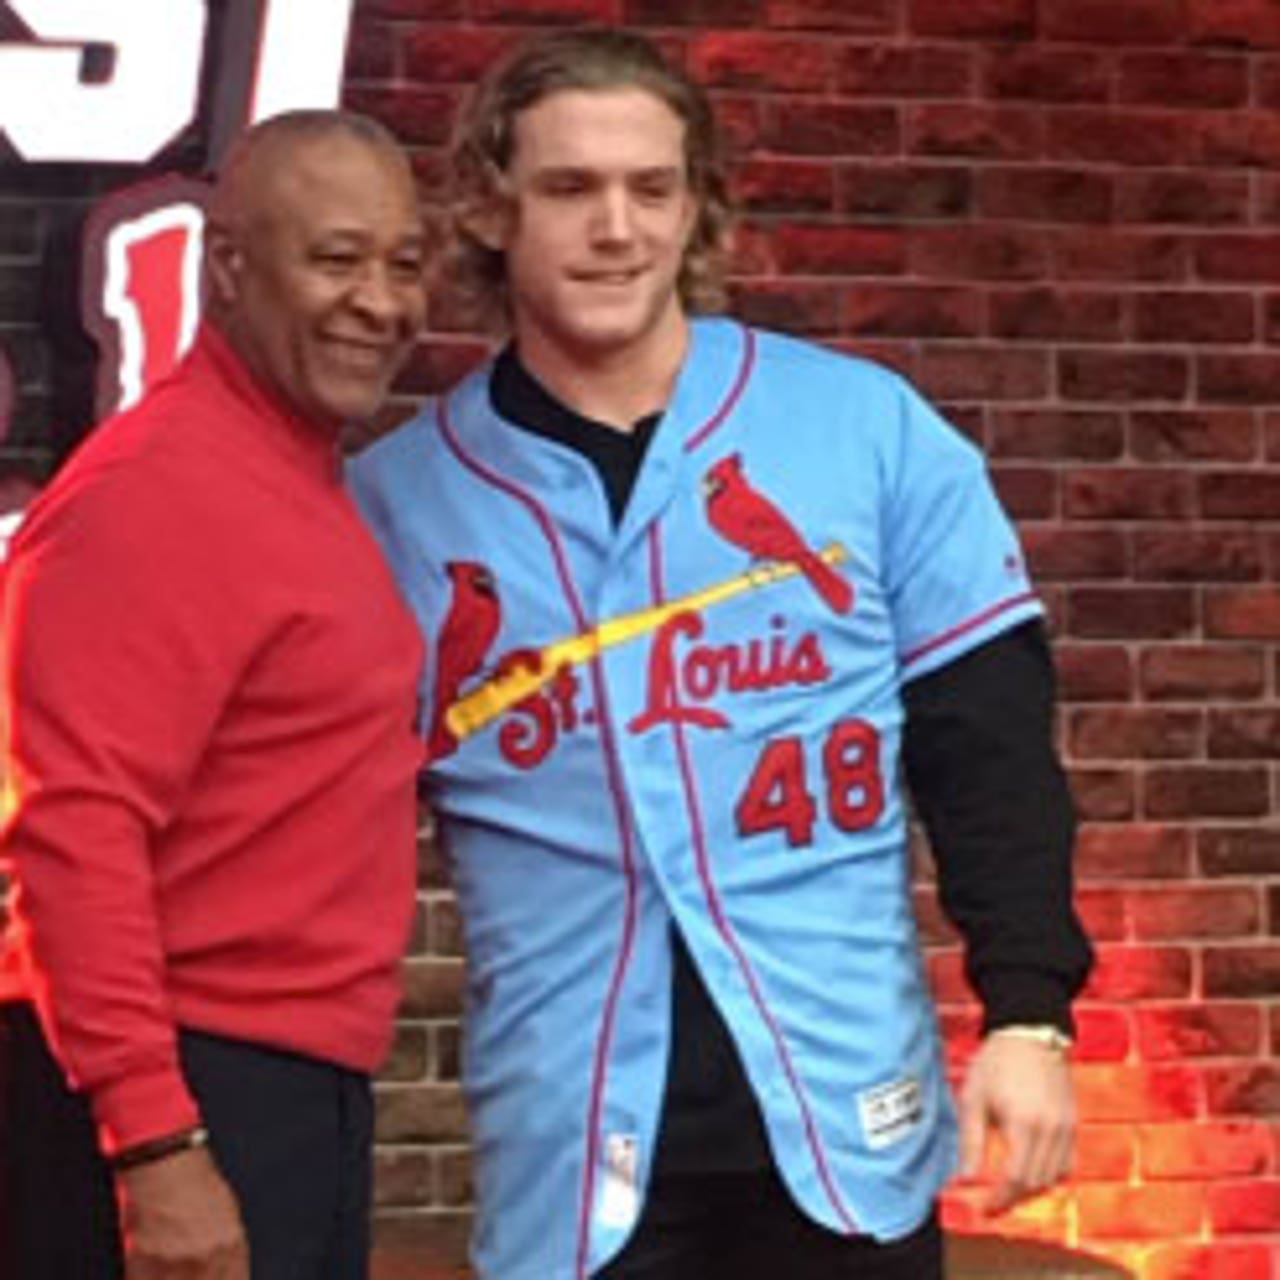 The powder blues are back: Cardinals unveil new alternate road jersey